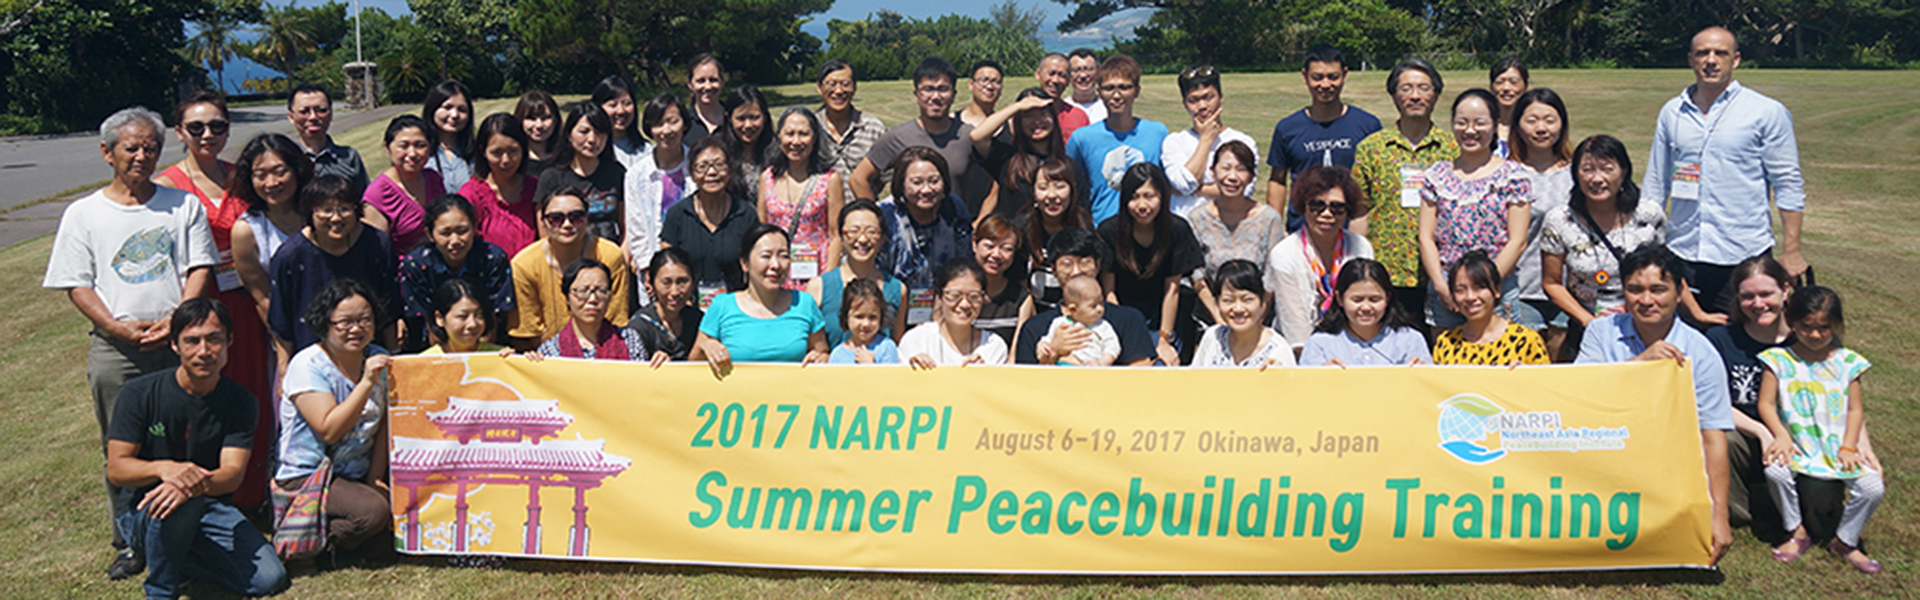 2017 NARPI newsletter, videos and photos